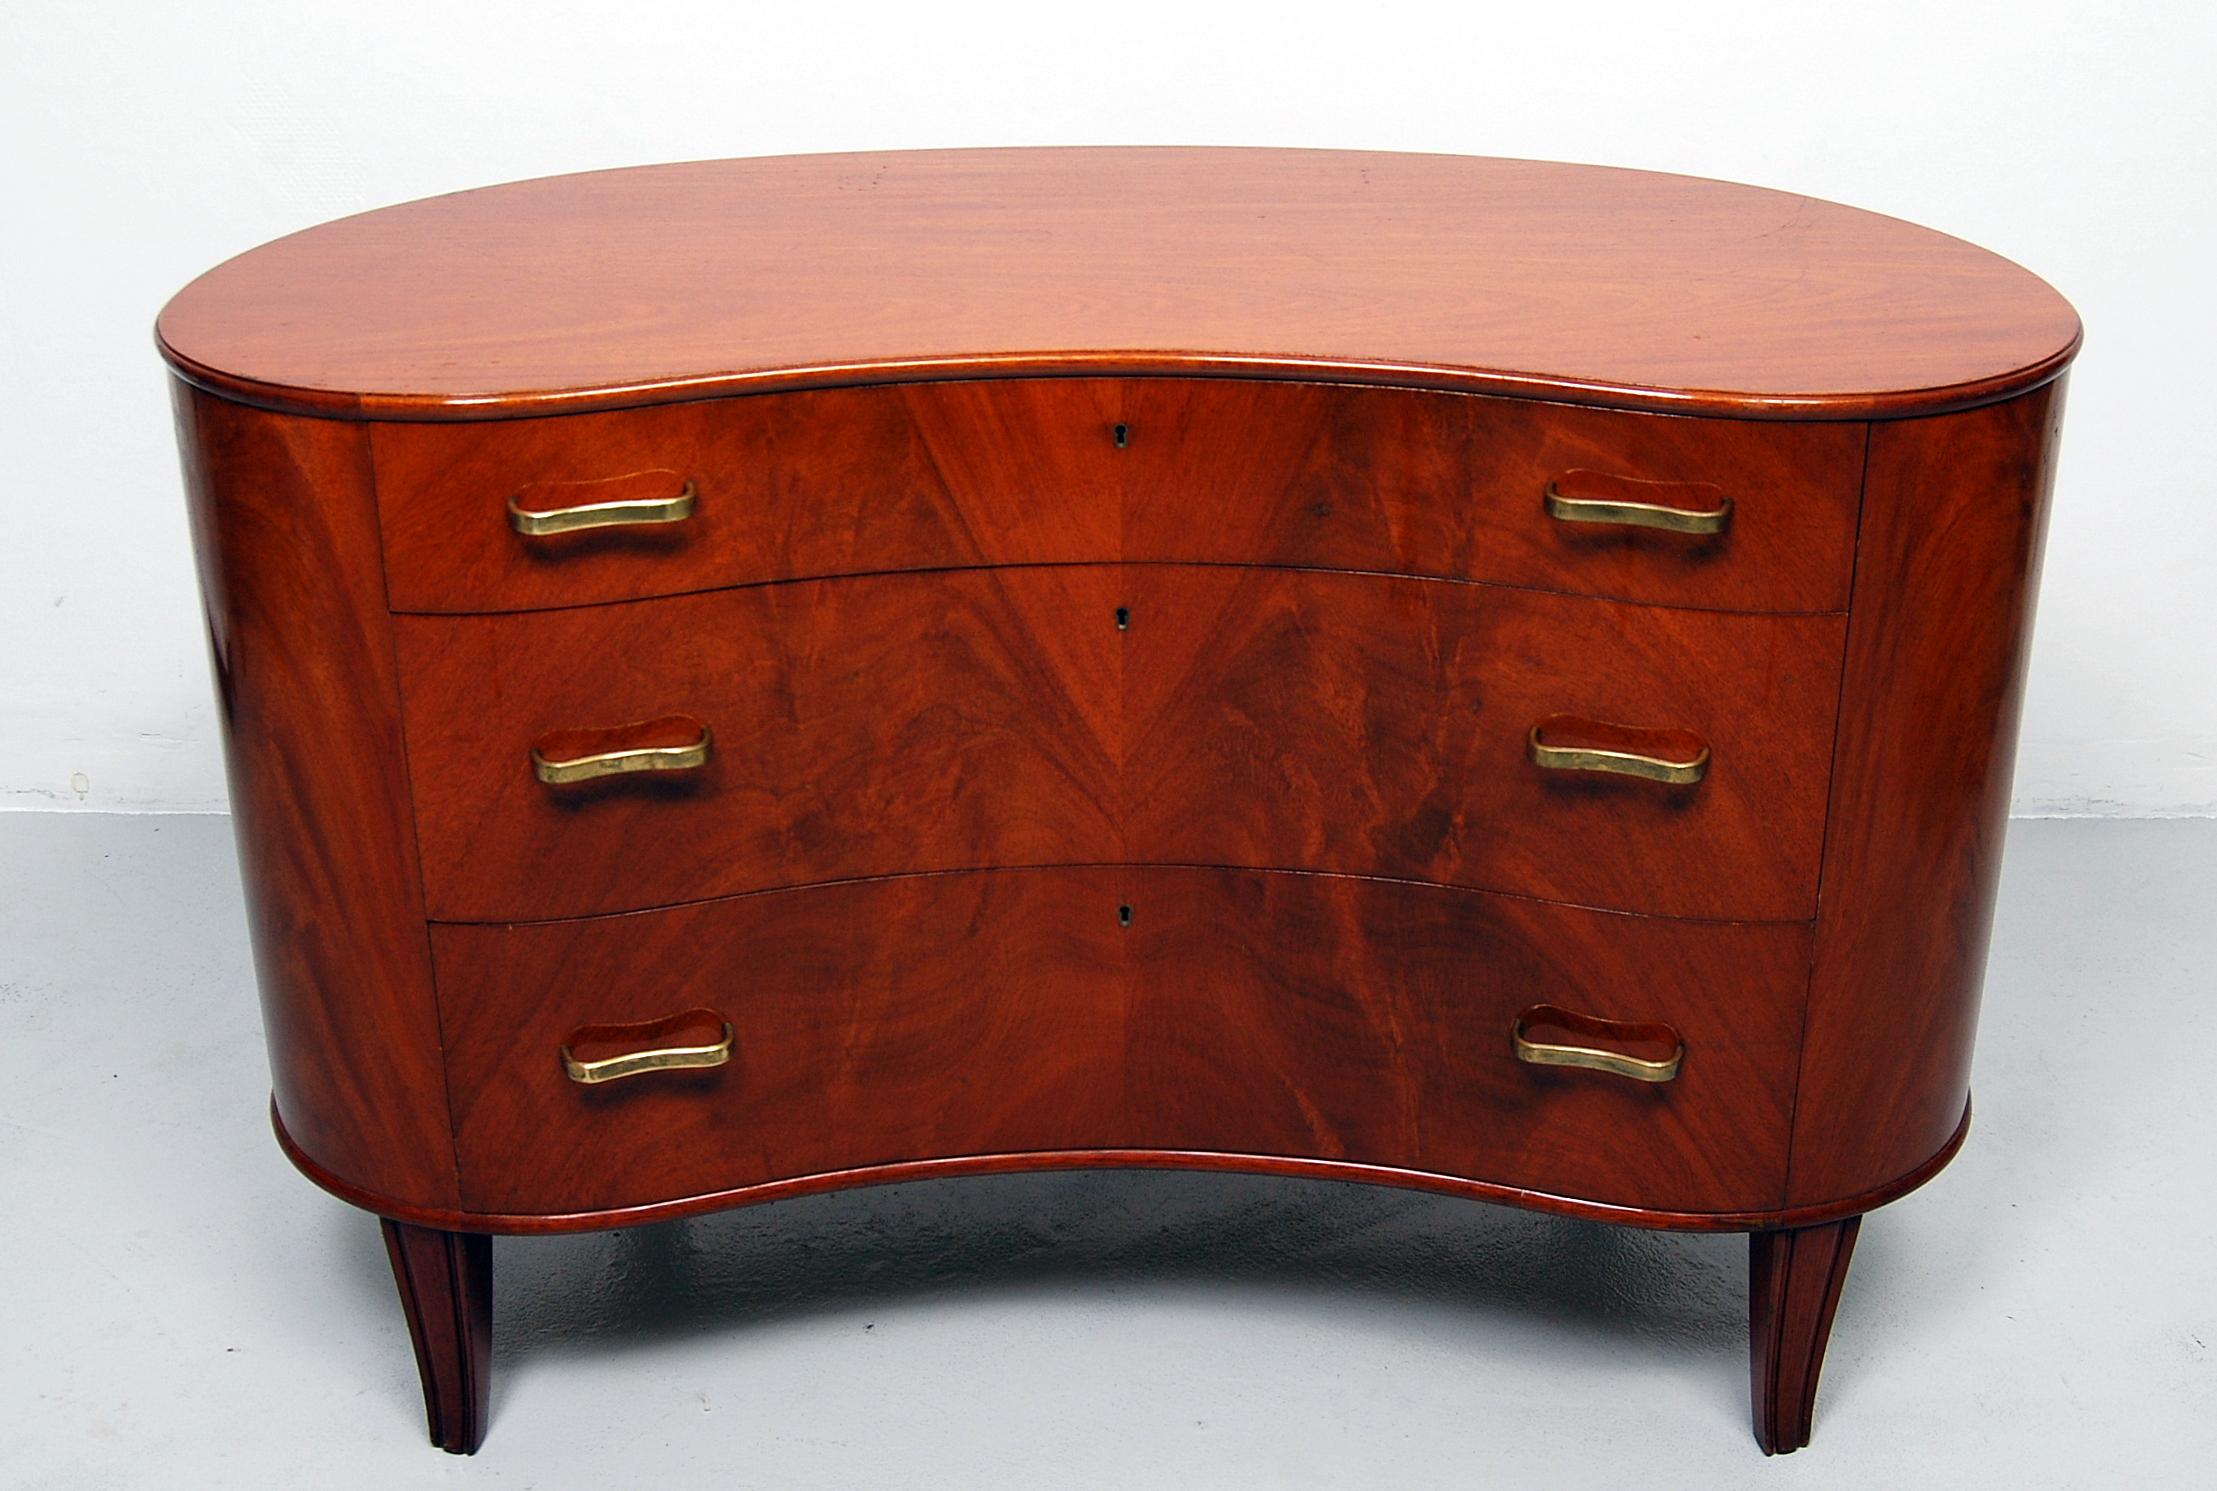 Rare and beautiful chest of drawers designed by Axel Larsson for SMF Bodafors in the 1940s. A top quality, kidney shaped piece of furniture with curved, solid brass handles. The inside of the three drawers are like new. This chest of drawers are in